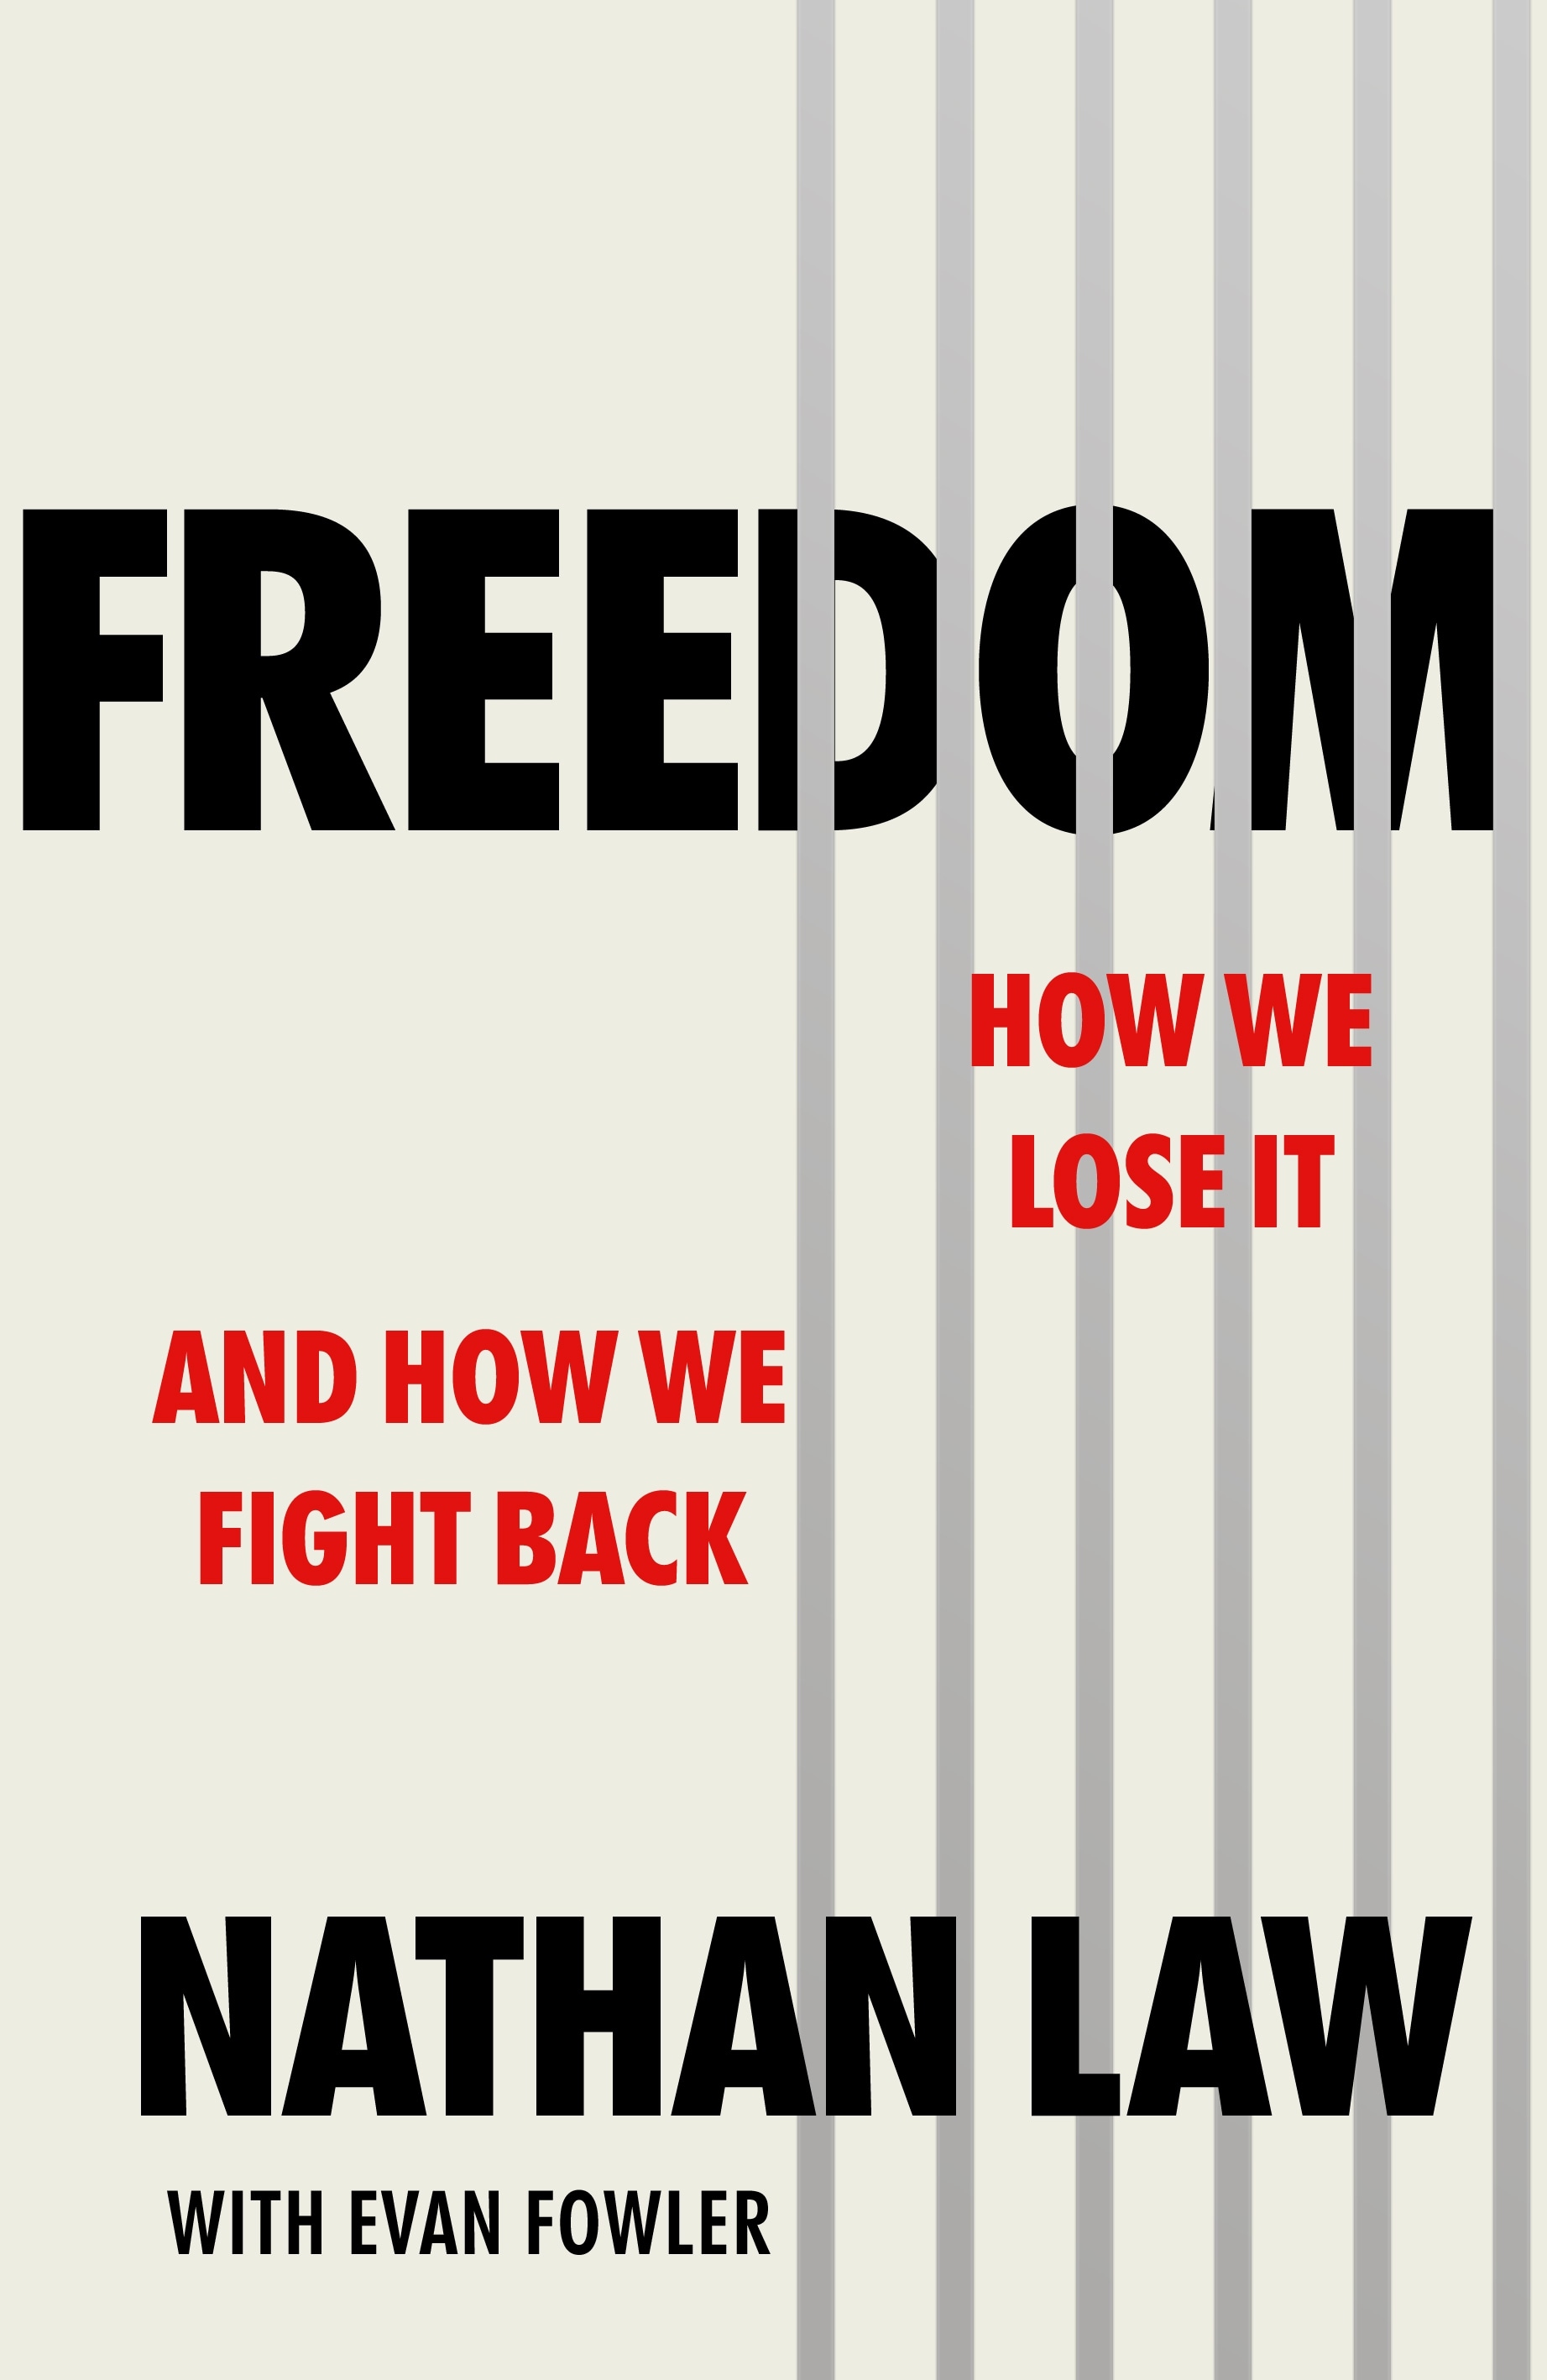 Book “Freedom” by Nathan Law, Evan Fowler — November 4, 2021